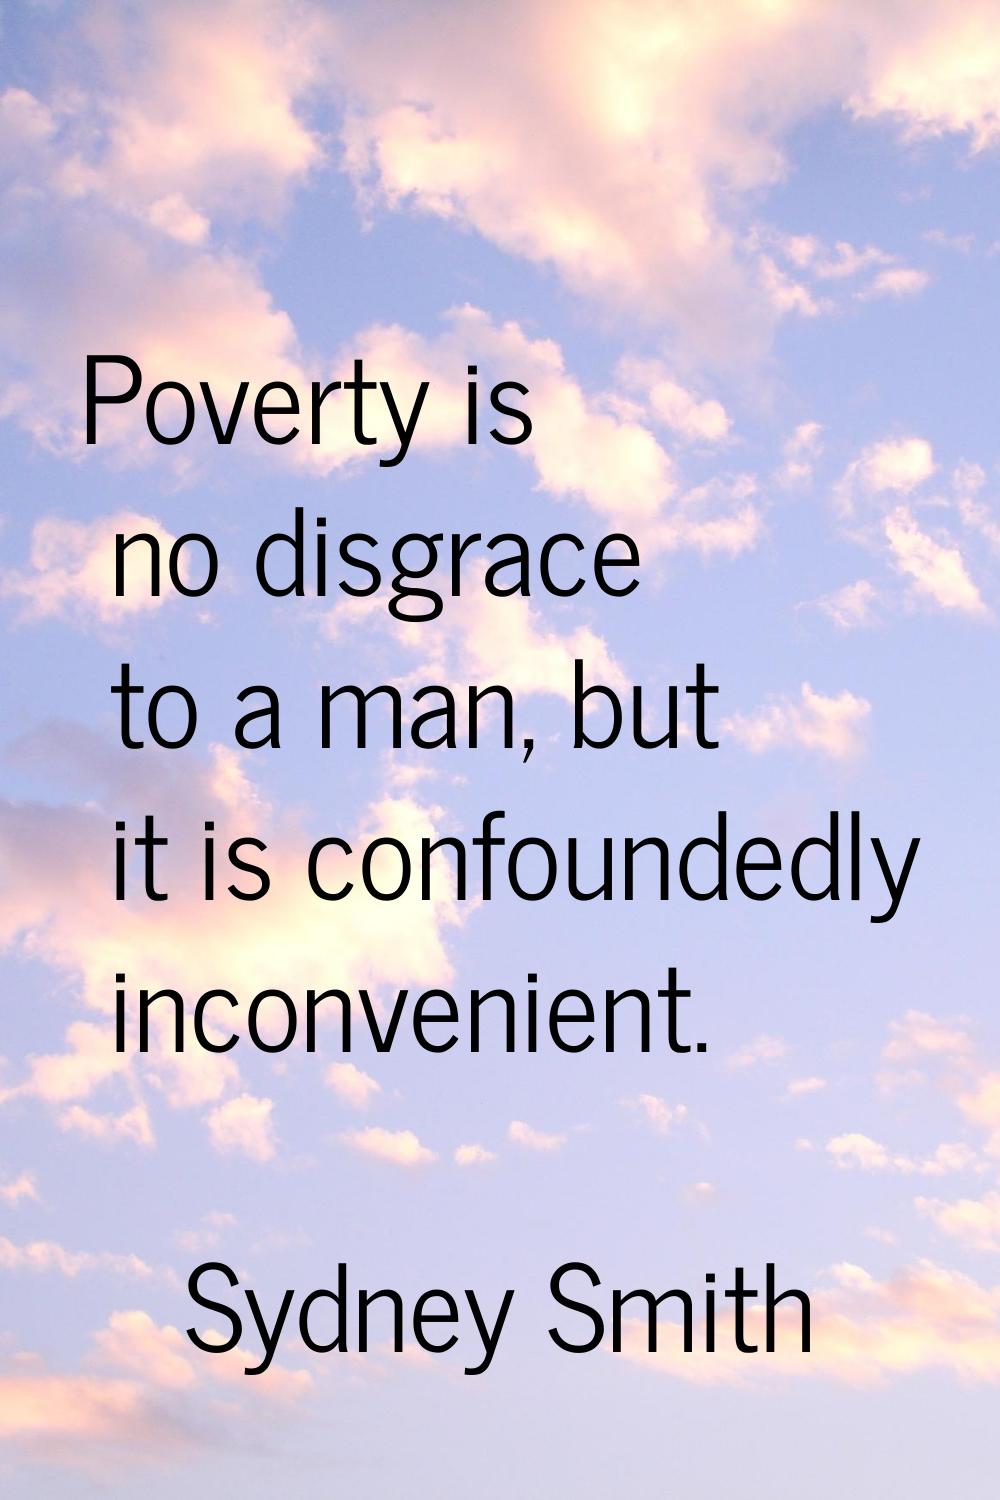 Poverty is no disgrace to a man, but it is confoundedly inconvenient.